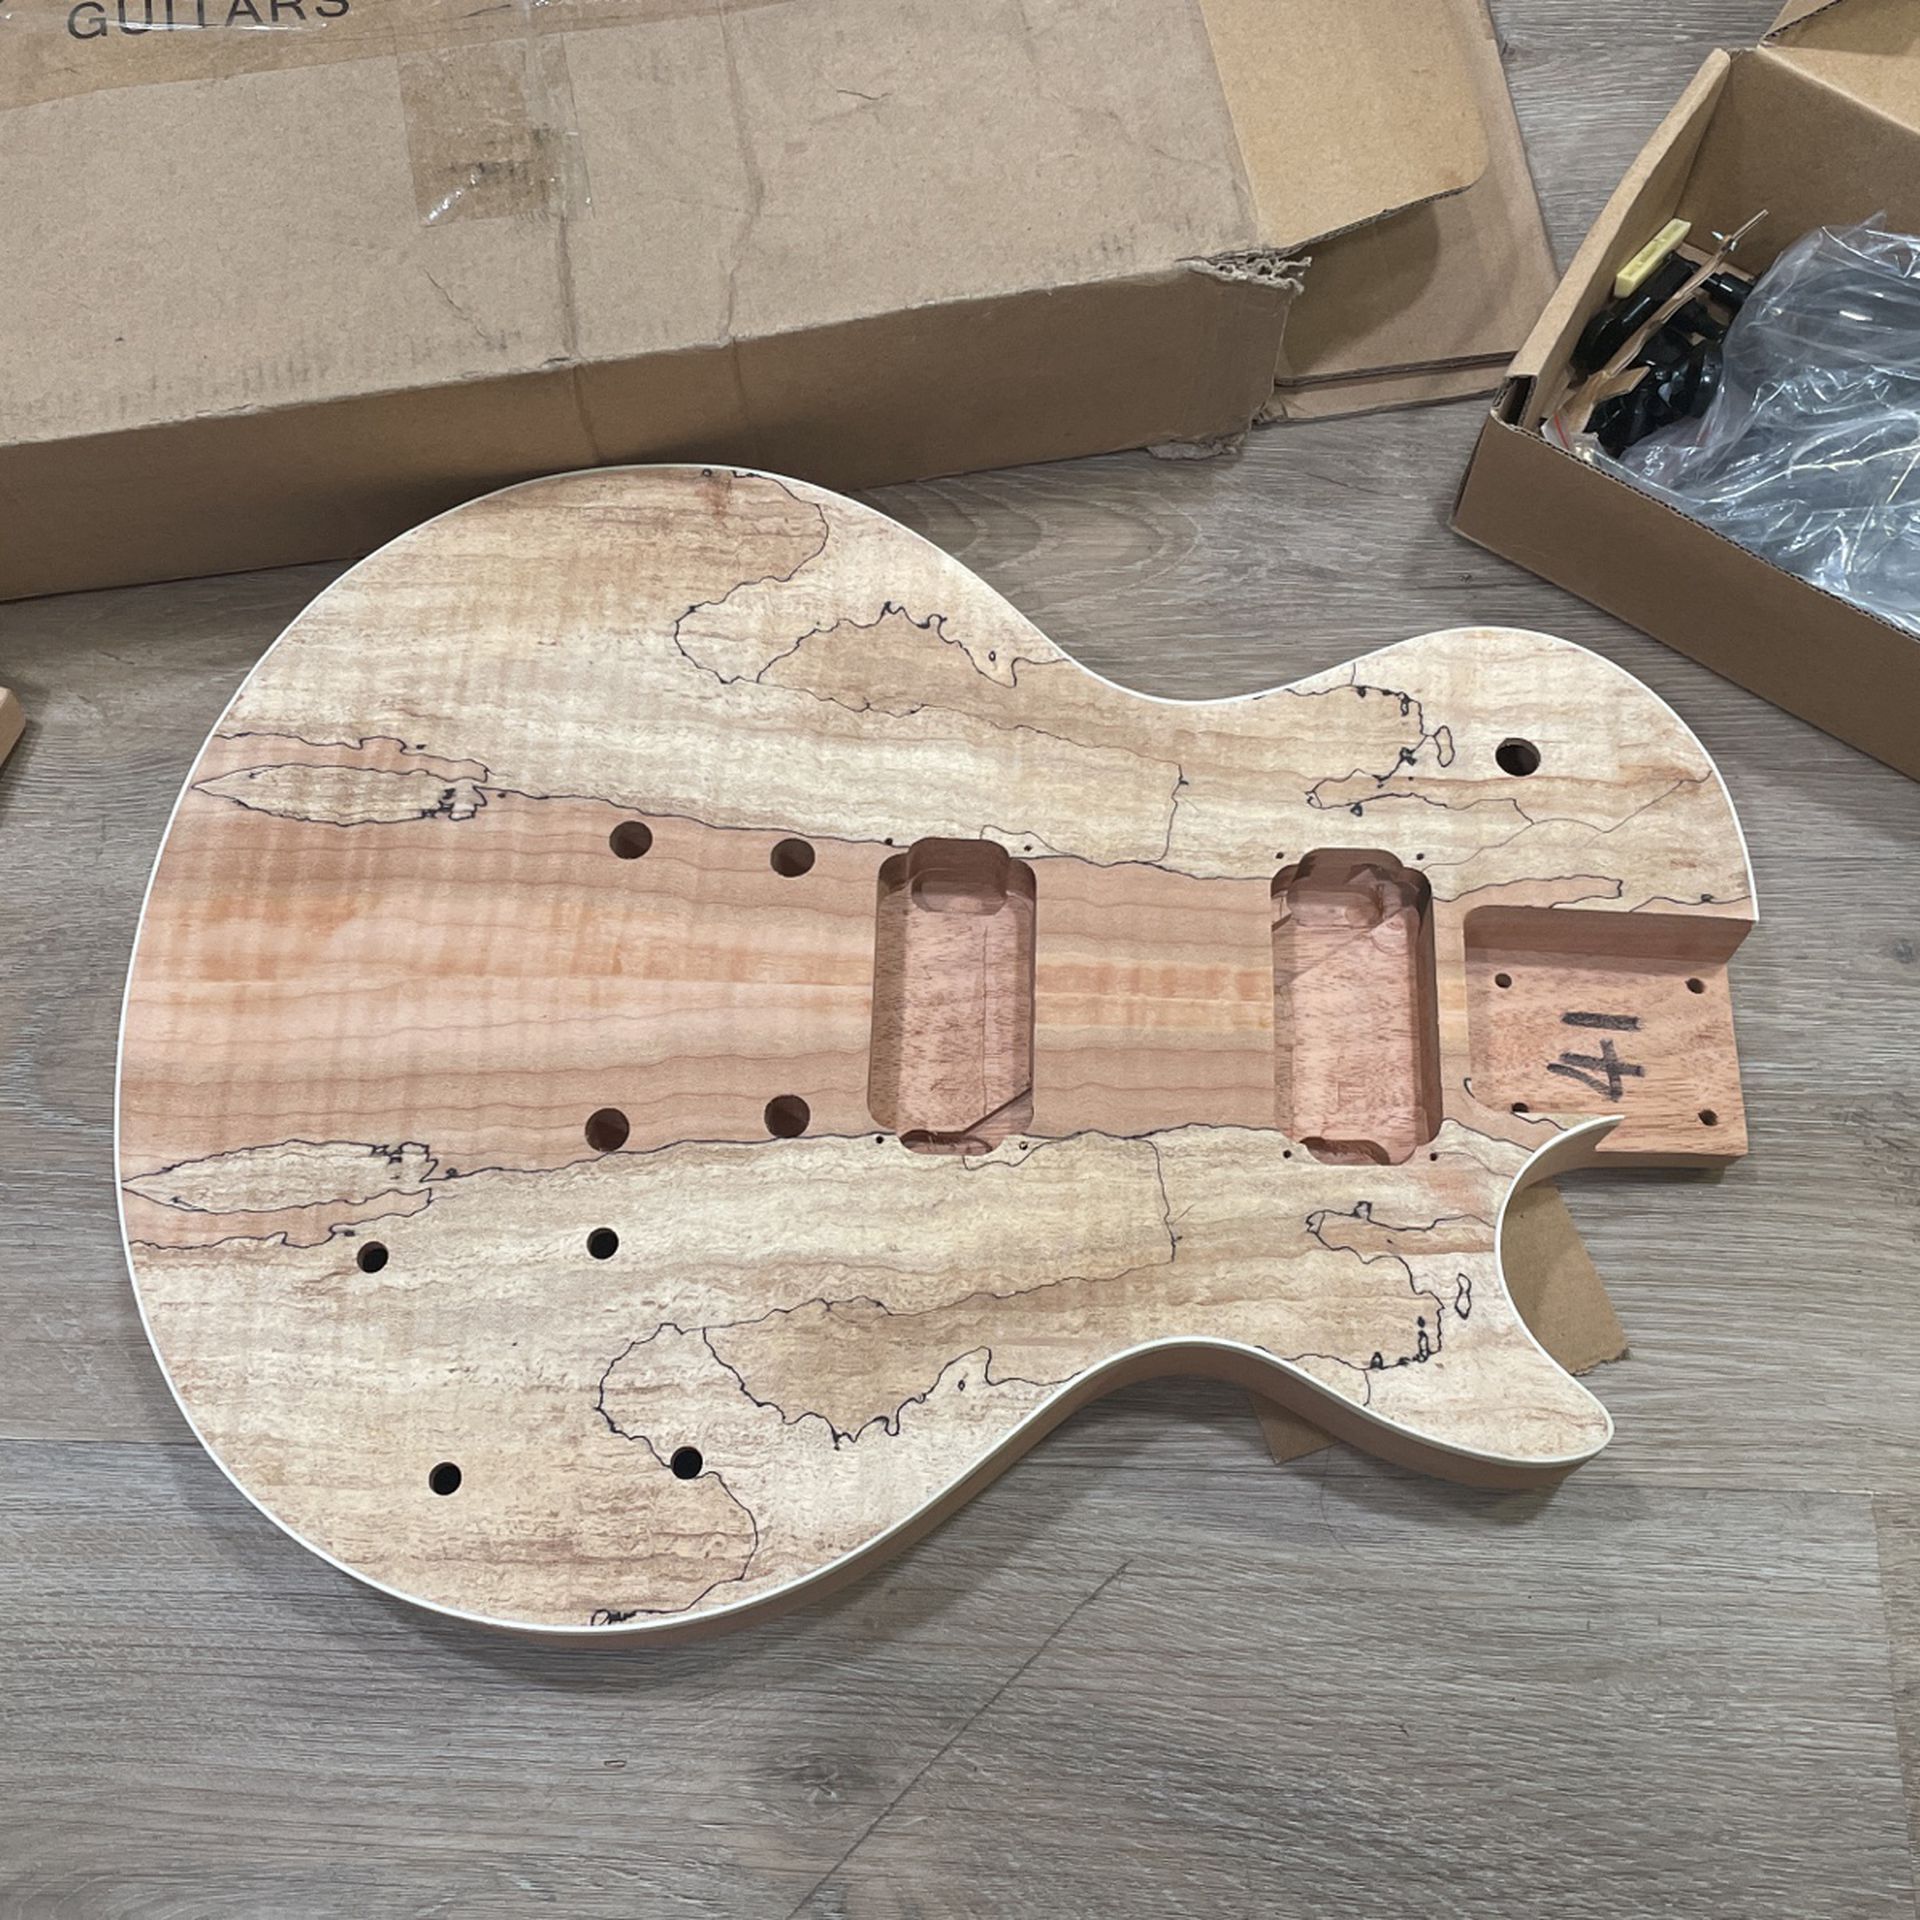 Solo LPK-75 DIY Electric Guitar Kit With Spalted Maple Top & Bolt On